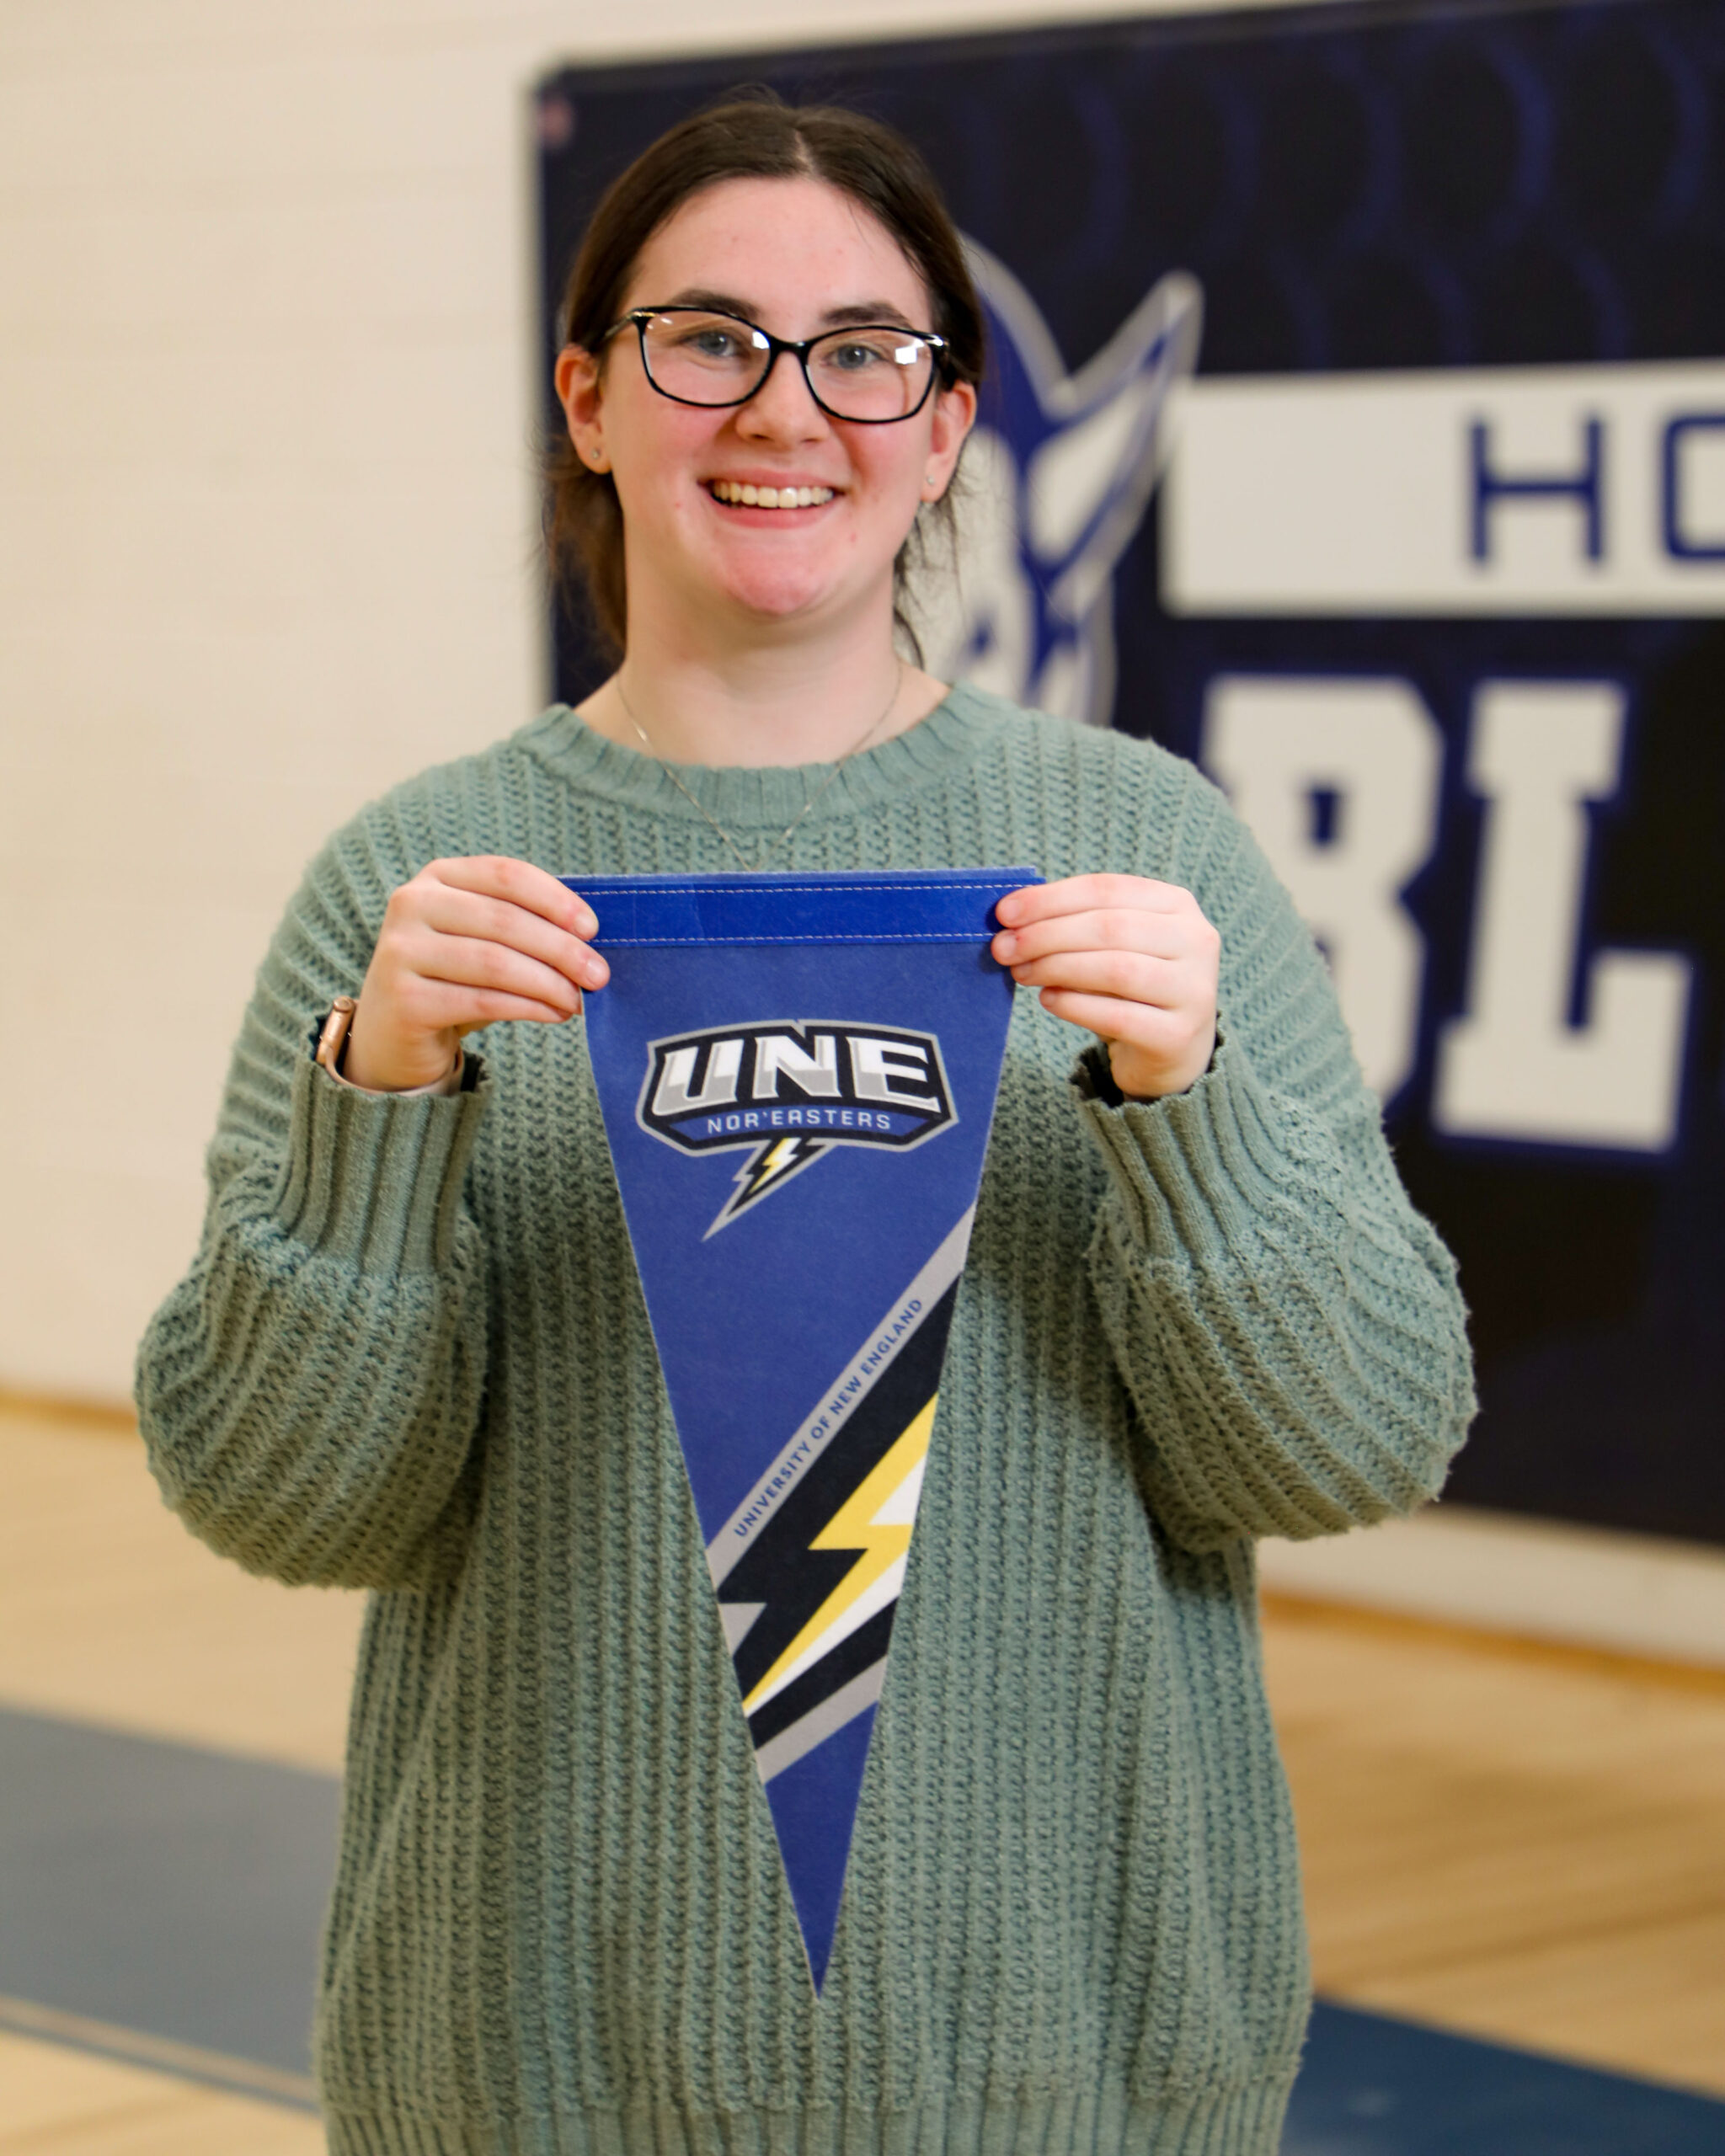 A color photo of a young woman with glasses smiling at the camera. In her hands in a pennant for the University of New England.